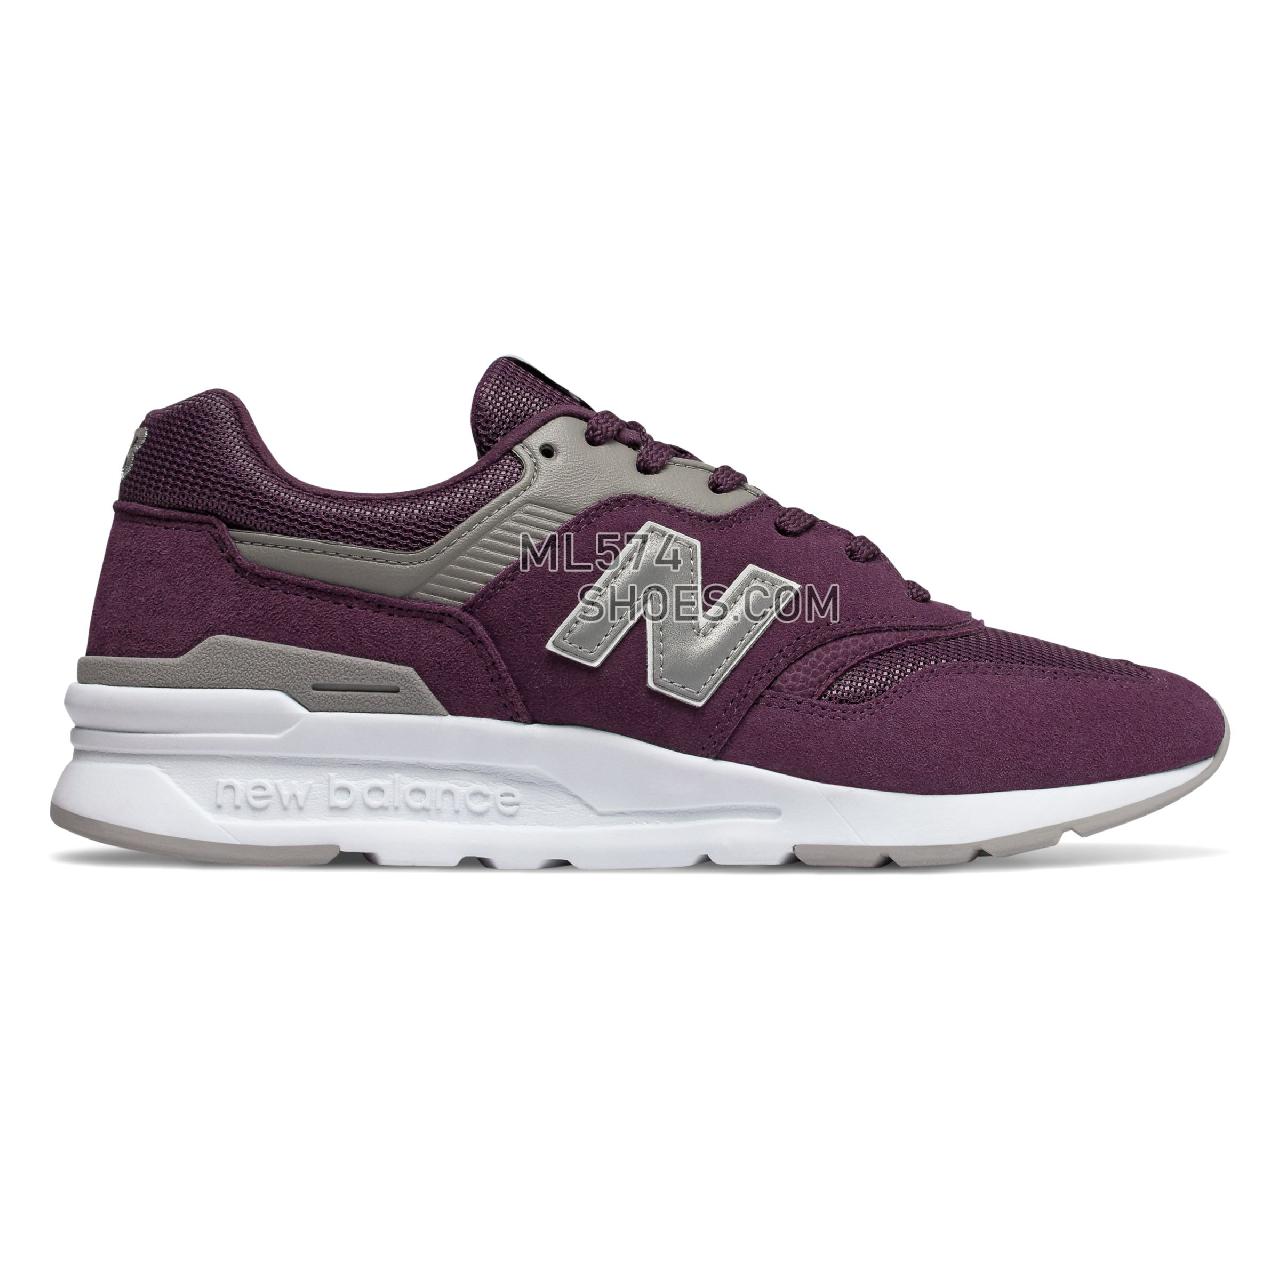 New Balance 997H - Men's Sport Style Sneakers - Dark Currant with Silver - CM997HCH